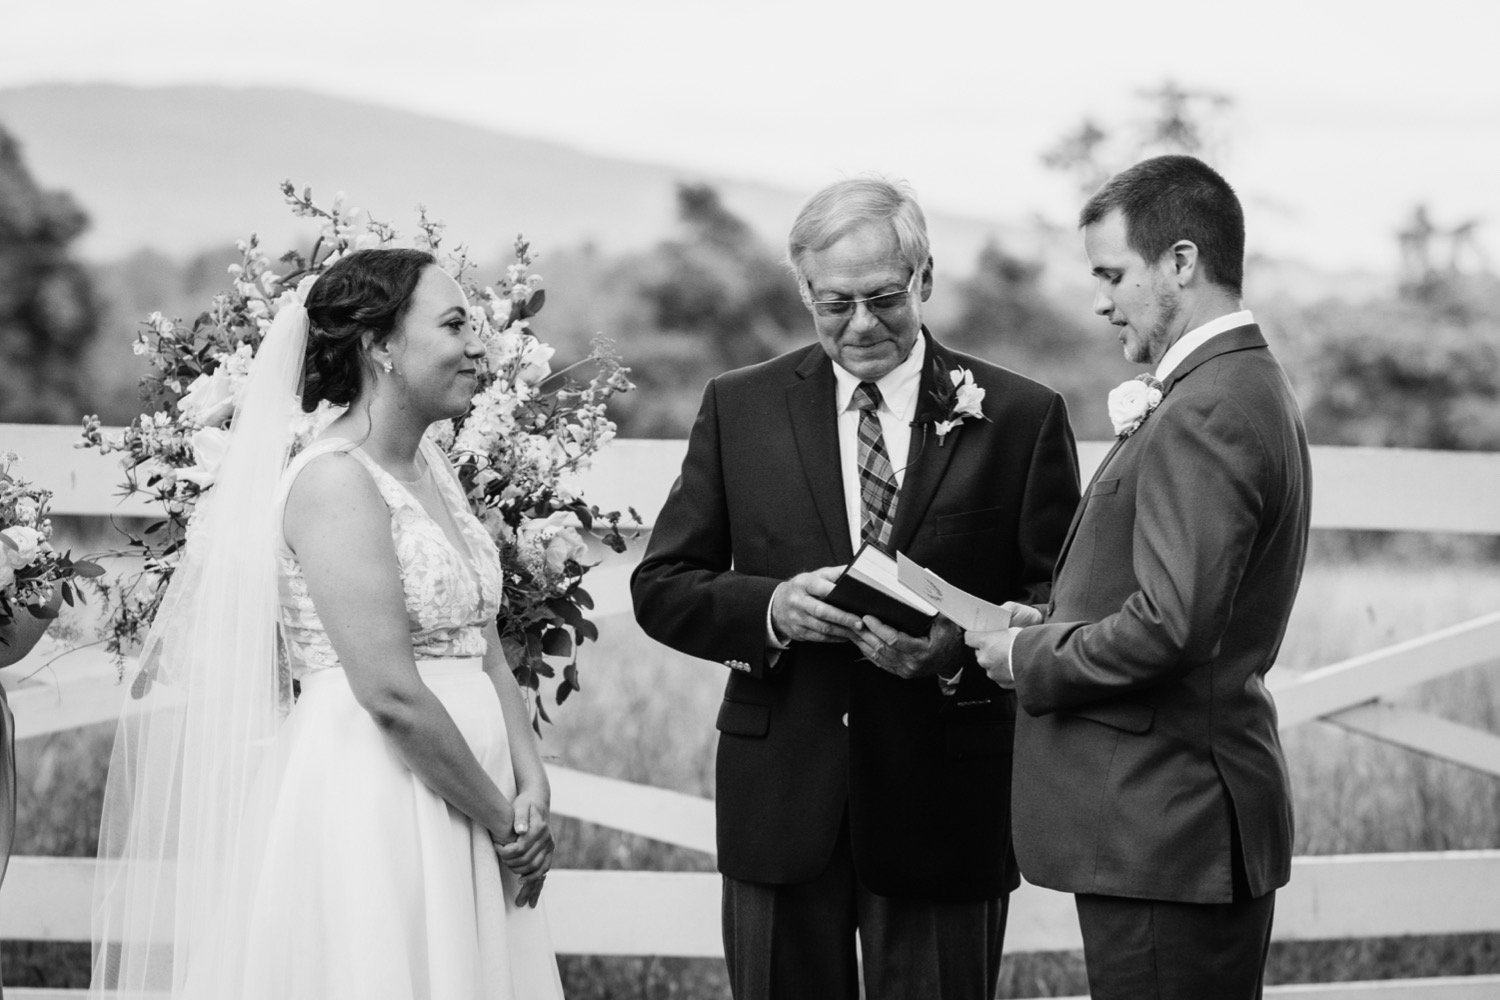 Groom reading vows during wedding at James Monroe's Highland in Charlottesville, VA wedding ceremony